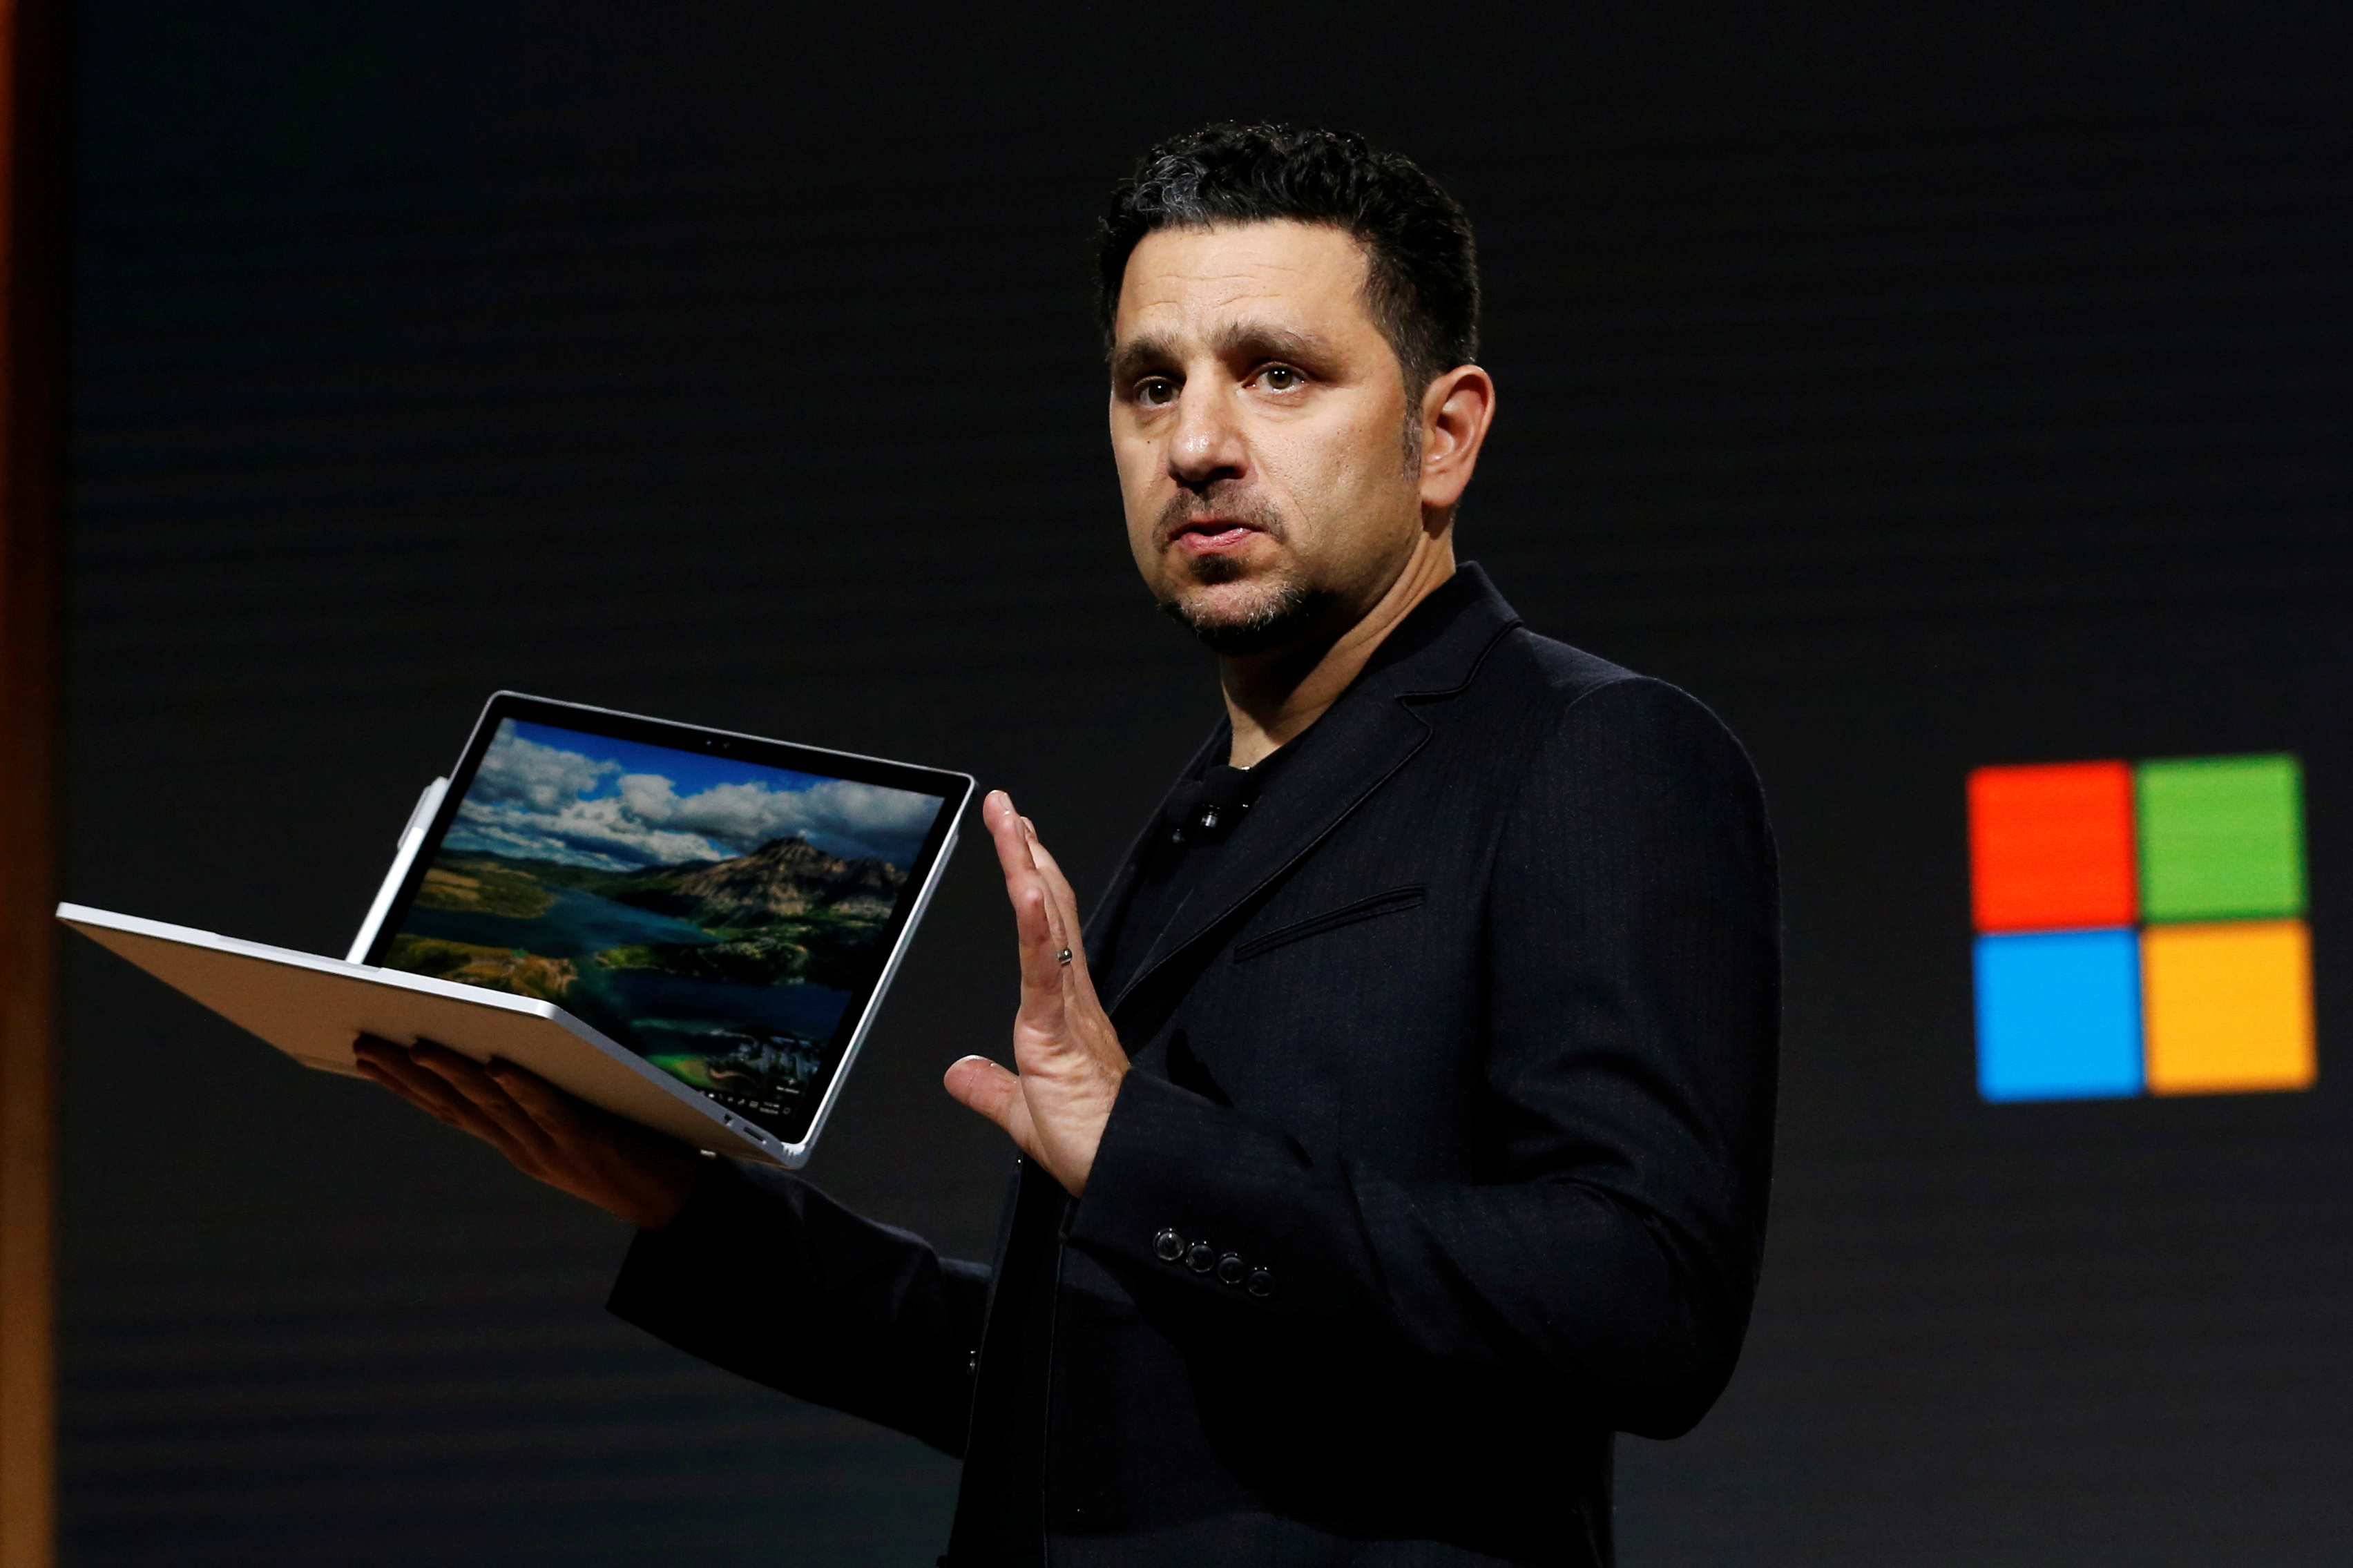 Panos Panay, Corporate Vice President for Surface Computing demonstrates the new Microsoft Surface Studio computer at a live event in the Manhattan borough of New York City